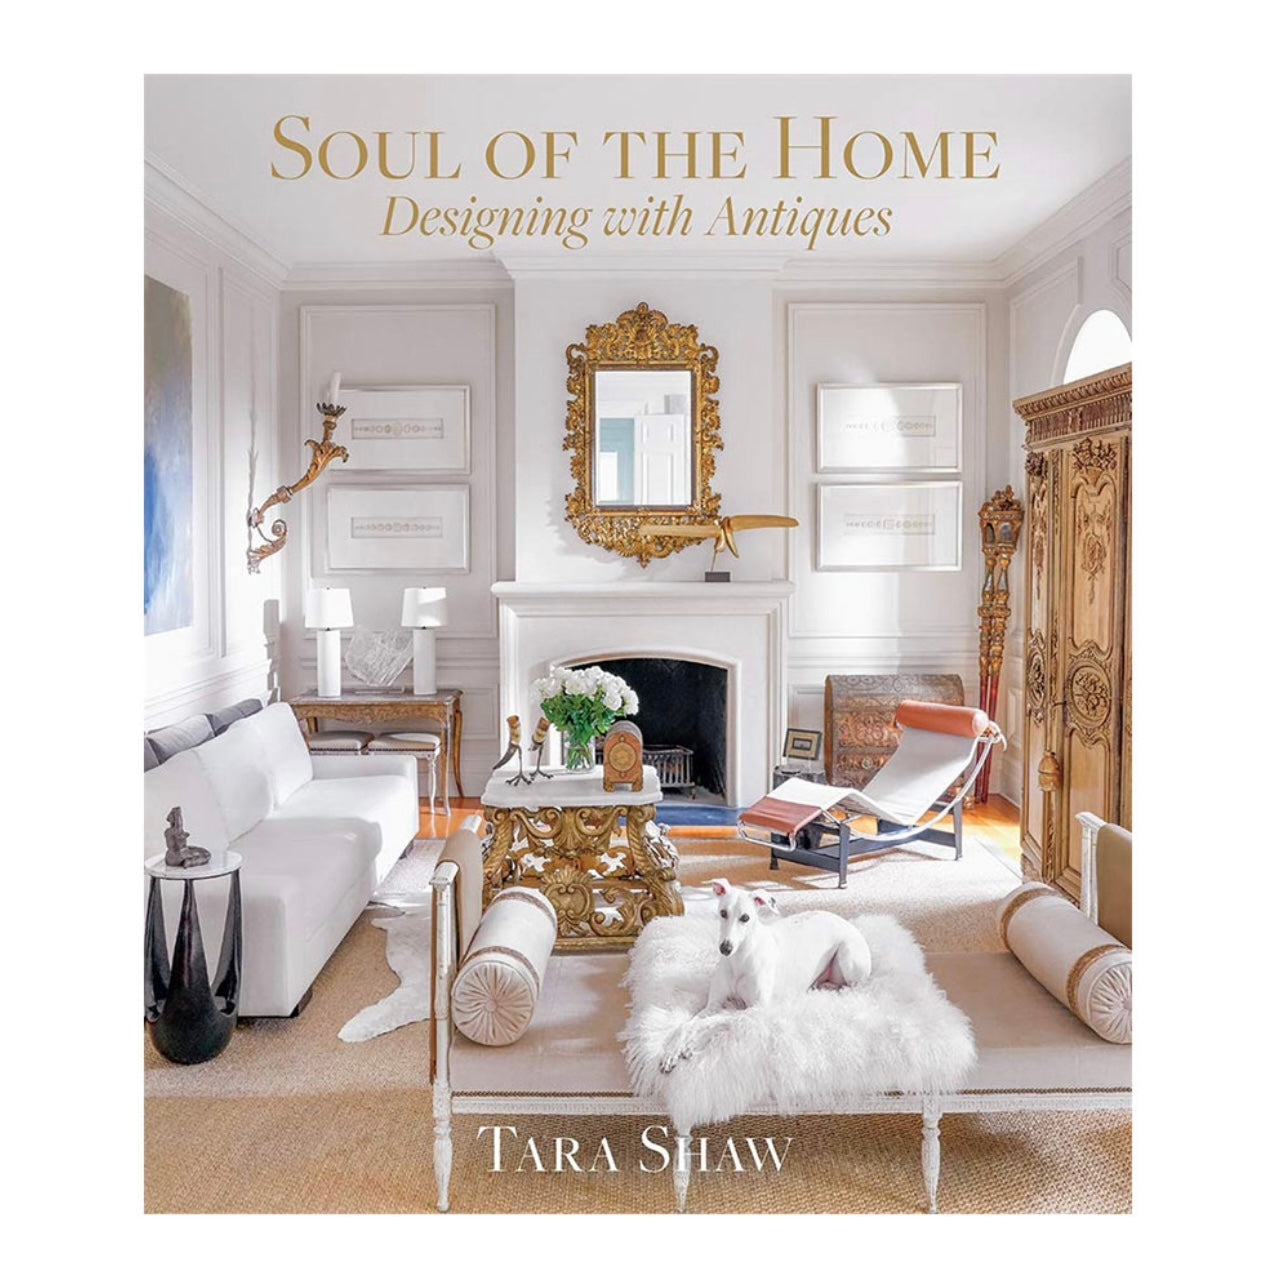 SOUL OF THE HOME - DESIGNING WITH ANTIQUES BY TARA SHAW